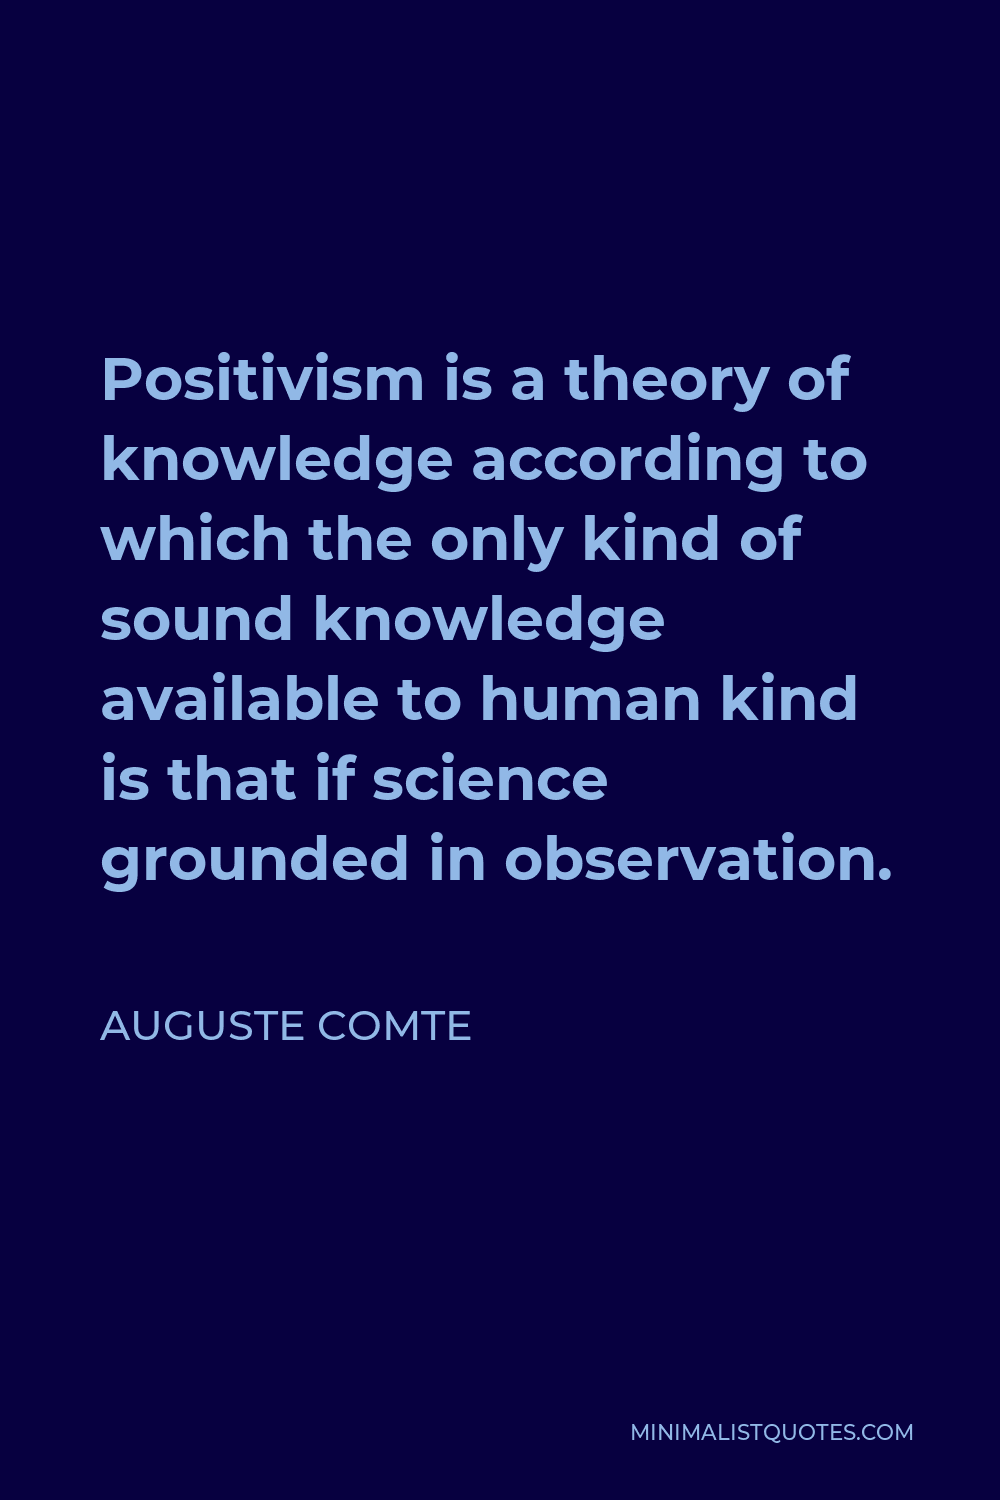 Auguste Comte Quote - Positivism is a theory of knowledge according to which the only kind of sound knowledge available to human kind is that if science grounded in observation.